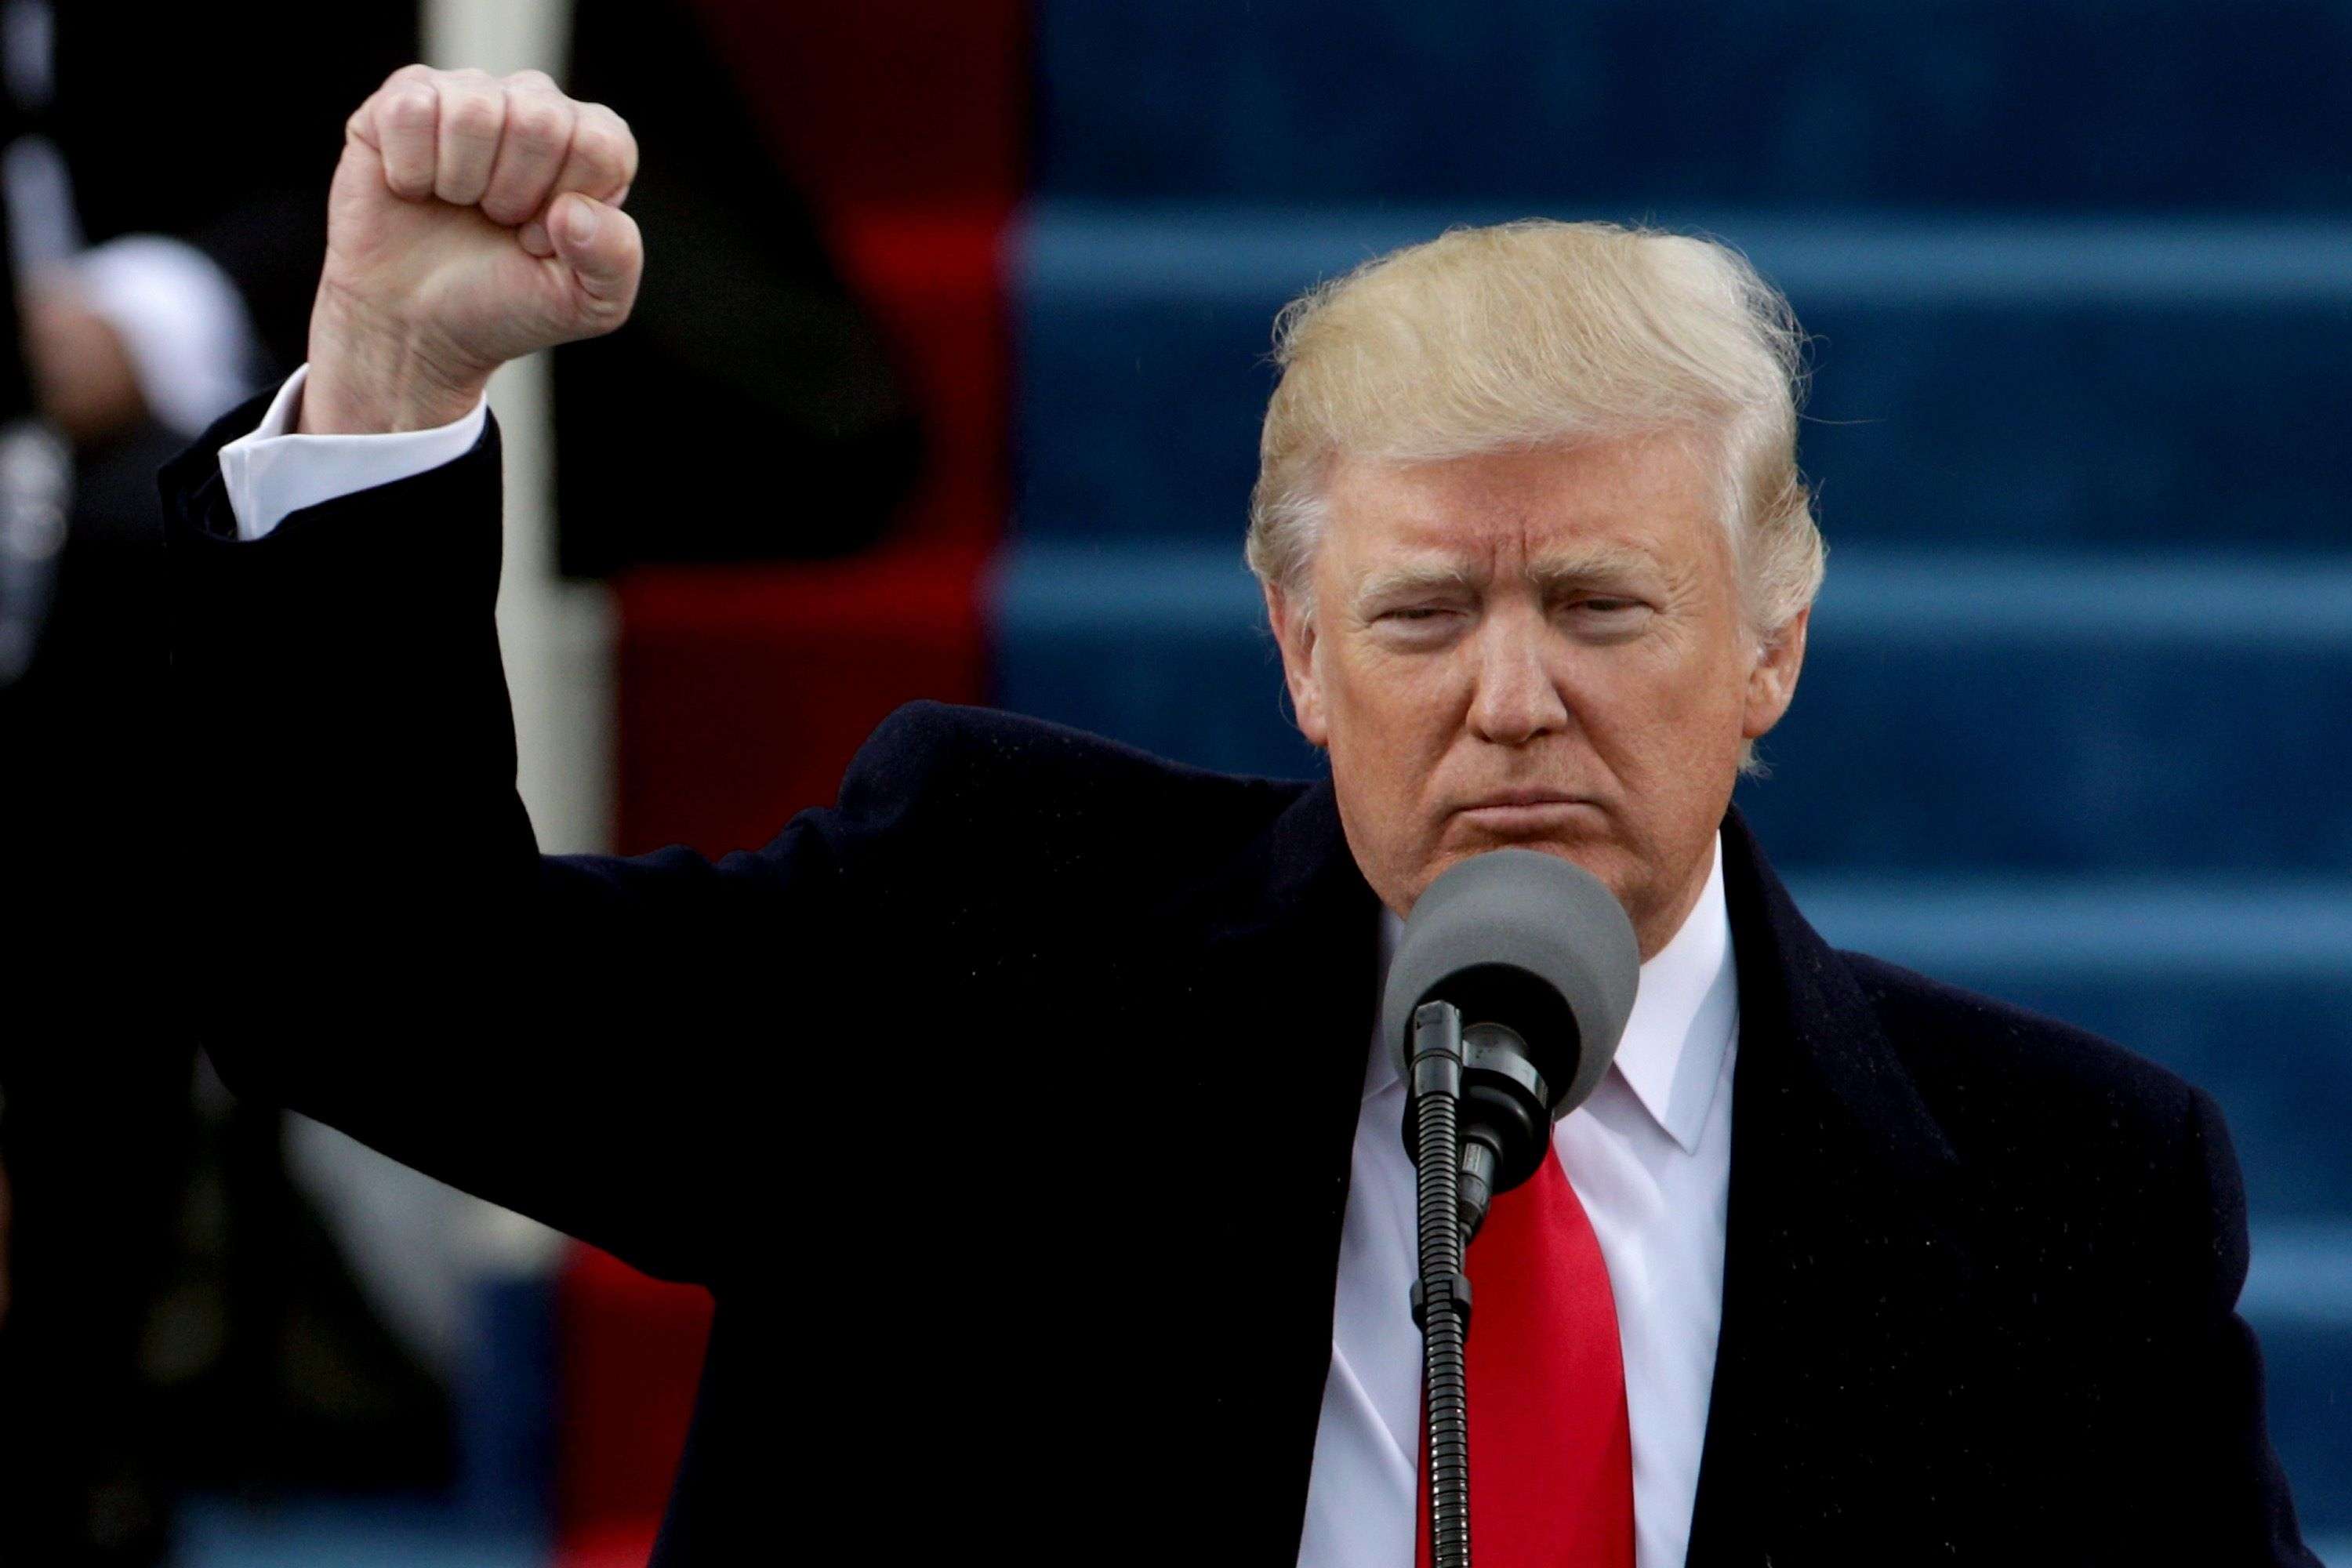 President Donald Trump raises a fist after his inauguration on the West Front of the US Capitol in Washington, DC. Photo: AFP